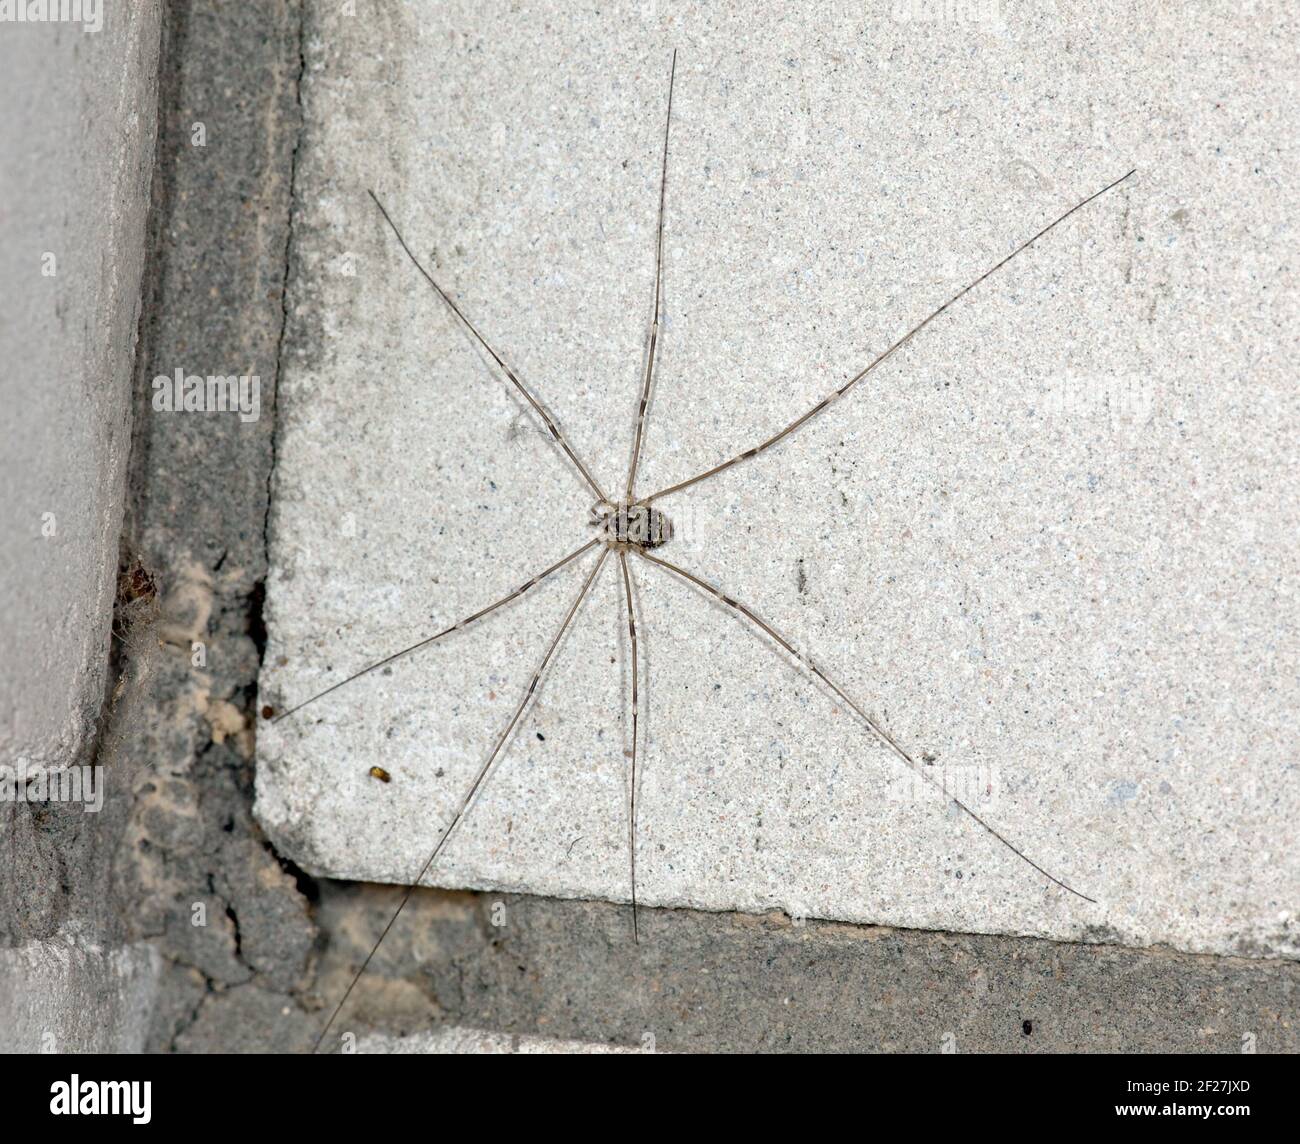 Spider long-legs sitting on a concrete wall Stock Photo